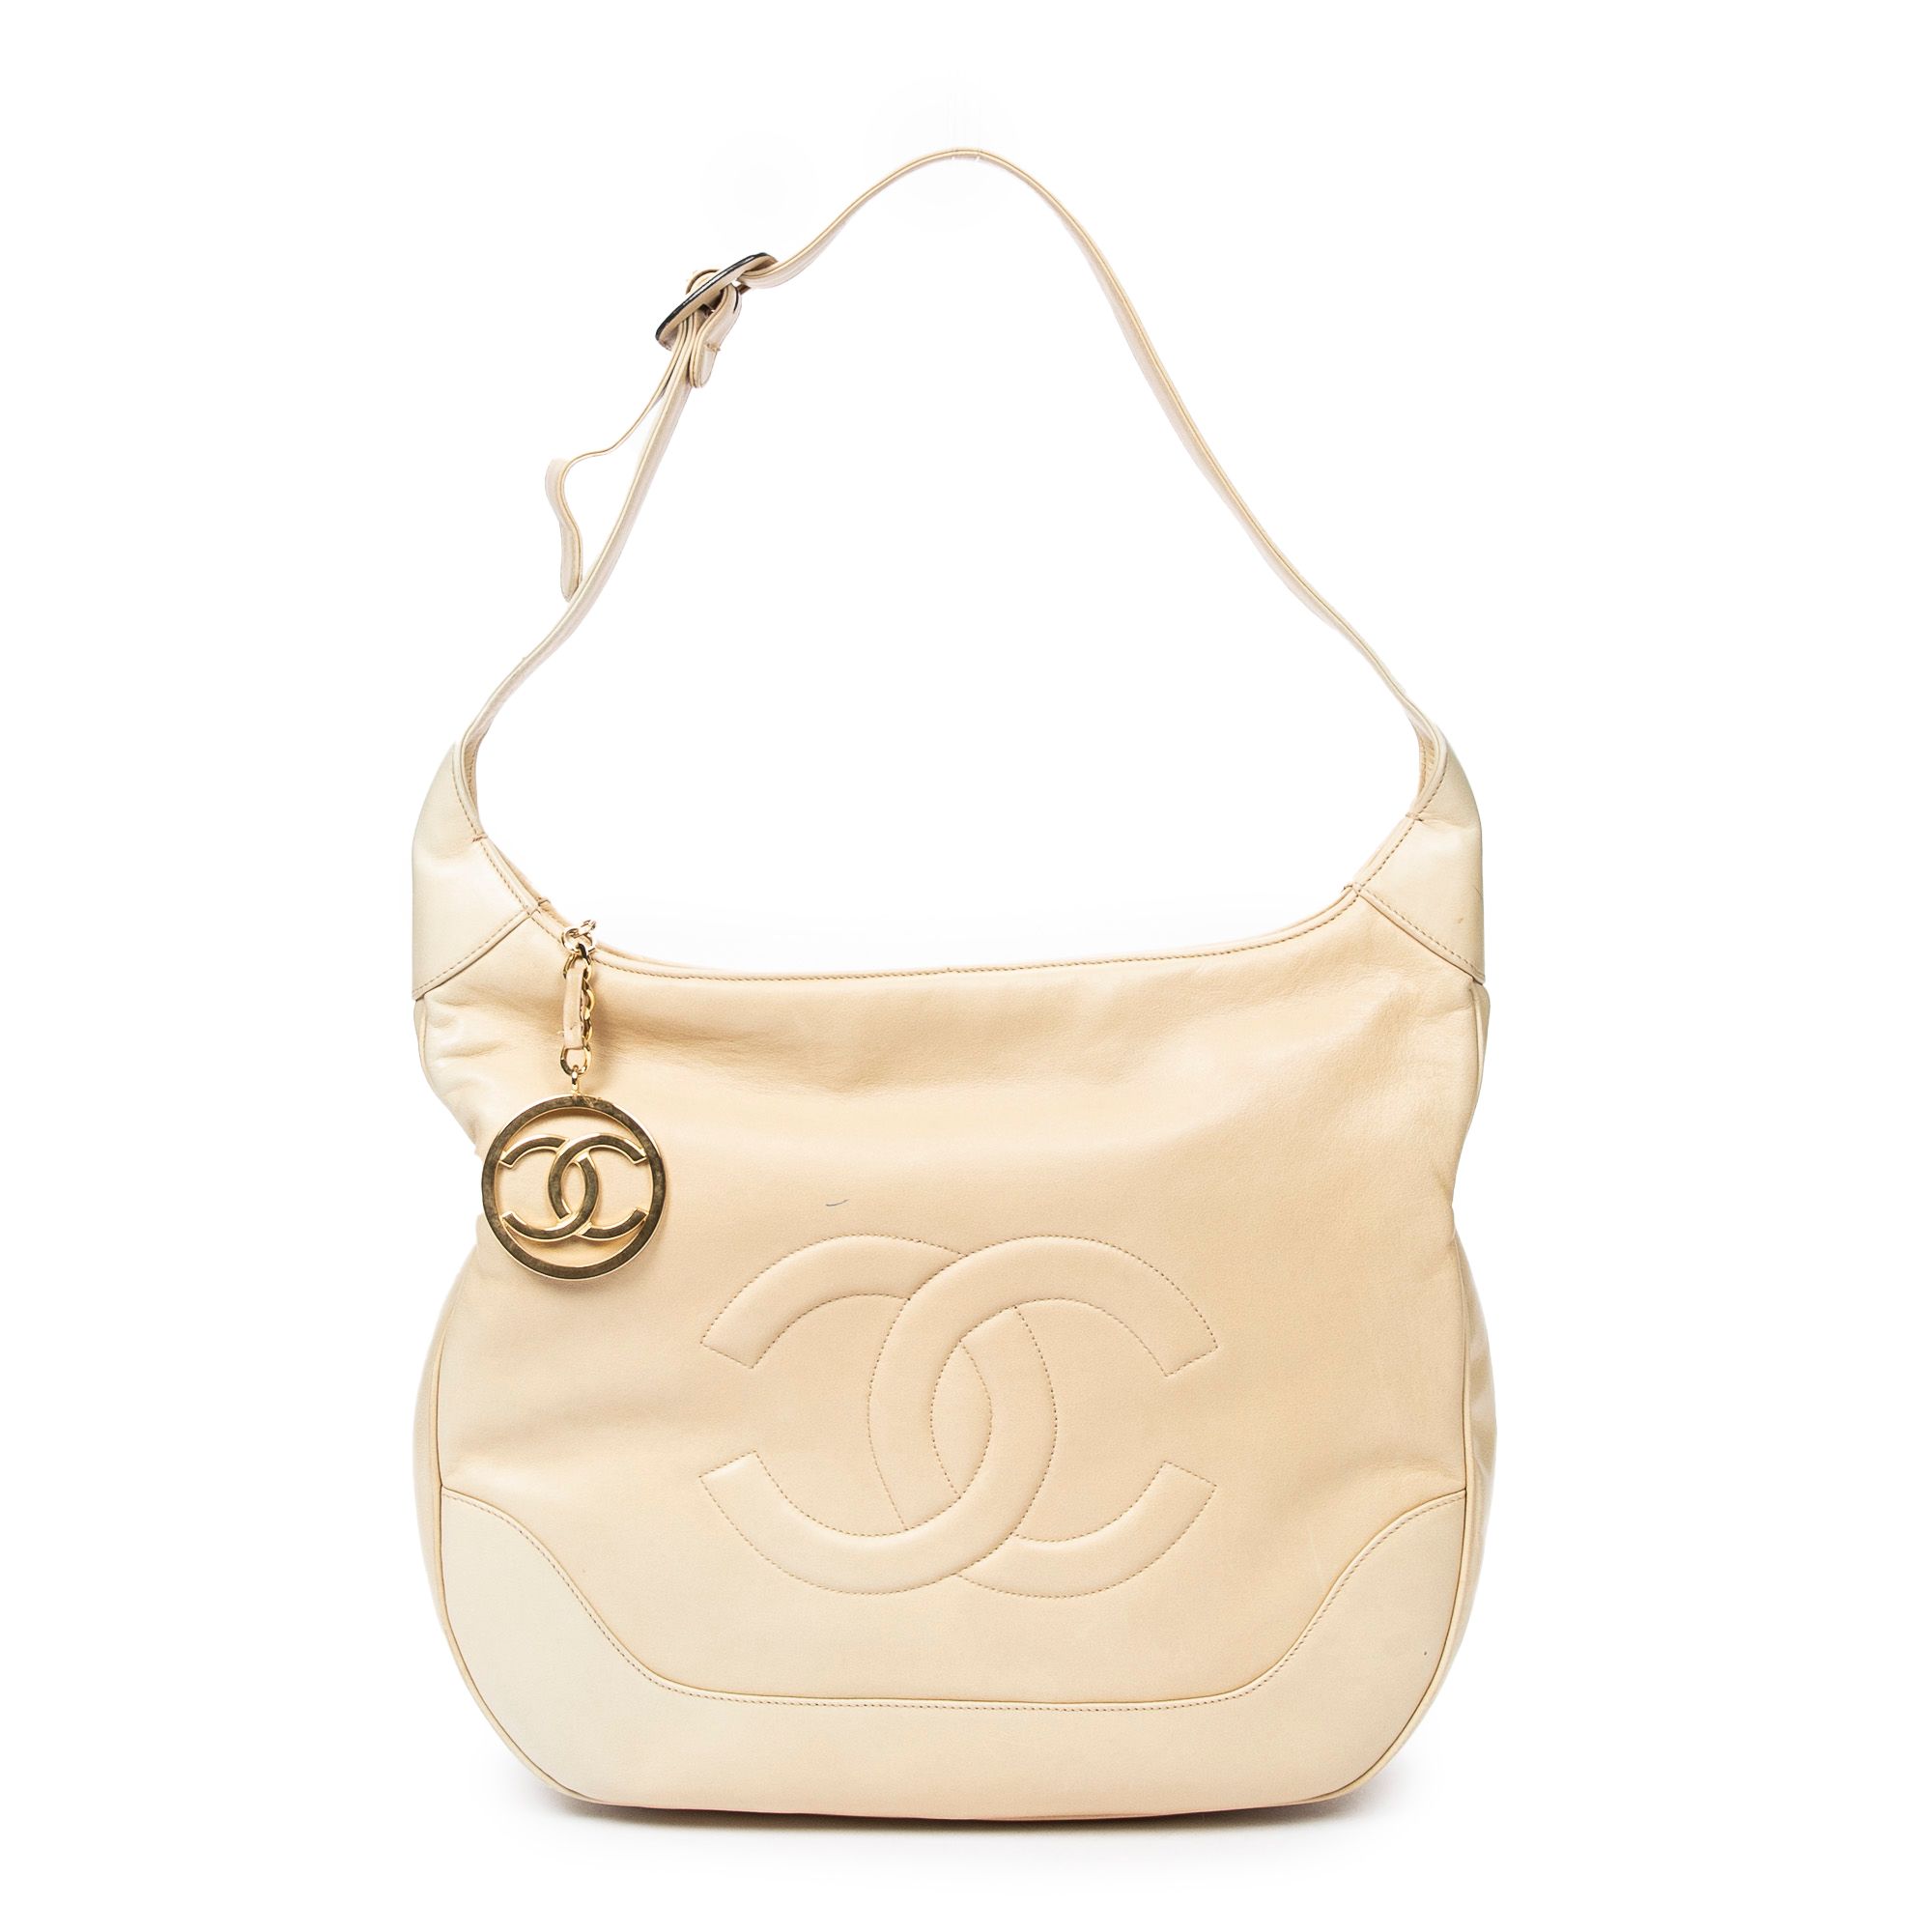 Chanel Large Vintage Hobo Bag in White Smooth Calfskin Leather